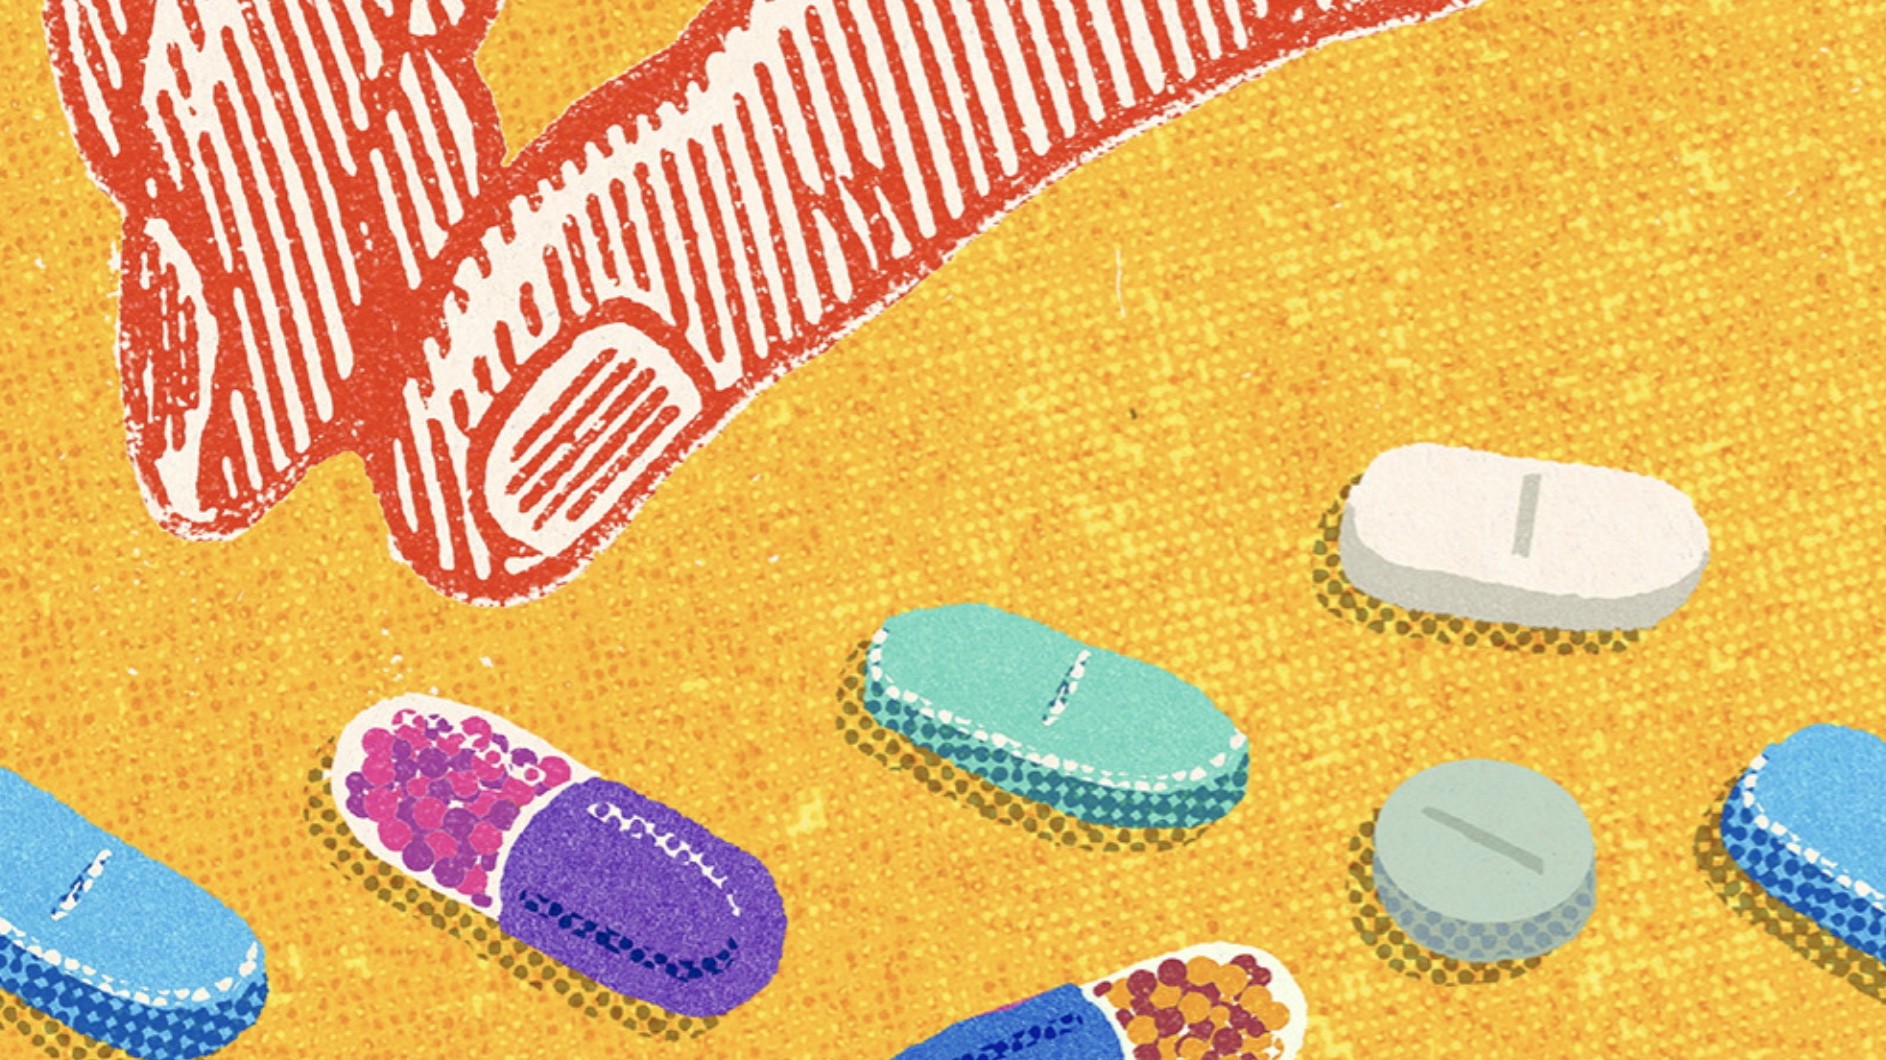 An illustration of a hand reaching for pills.